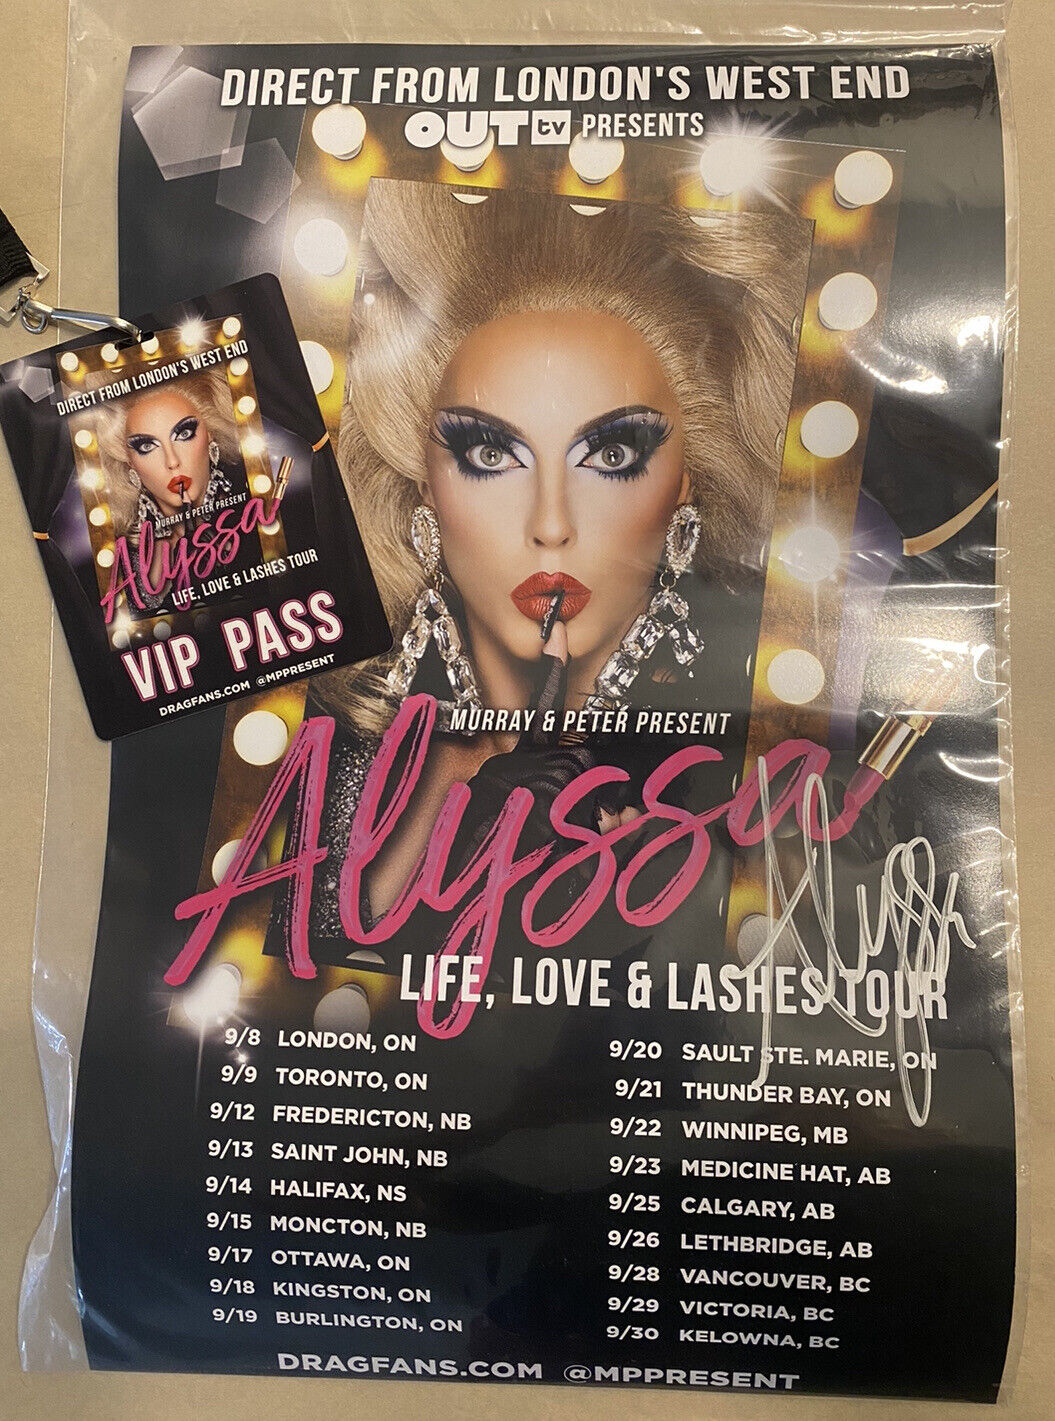 Signed Alyssa Edwards Life, Love & Lashes Tour Poster! Rupaul’s Drag Race! Vip